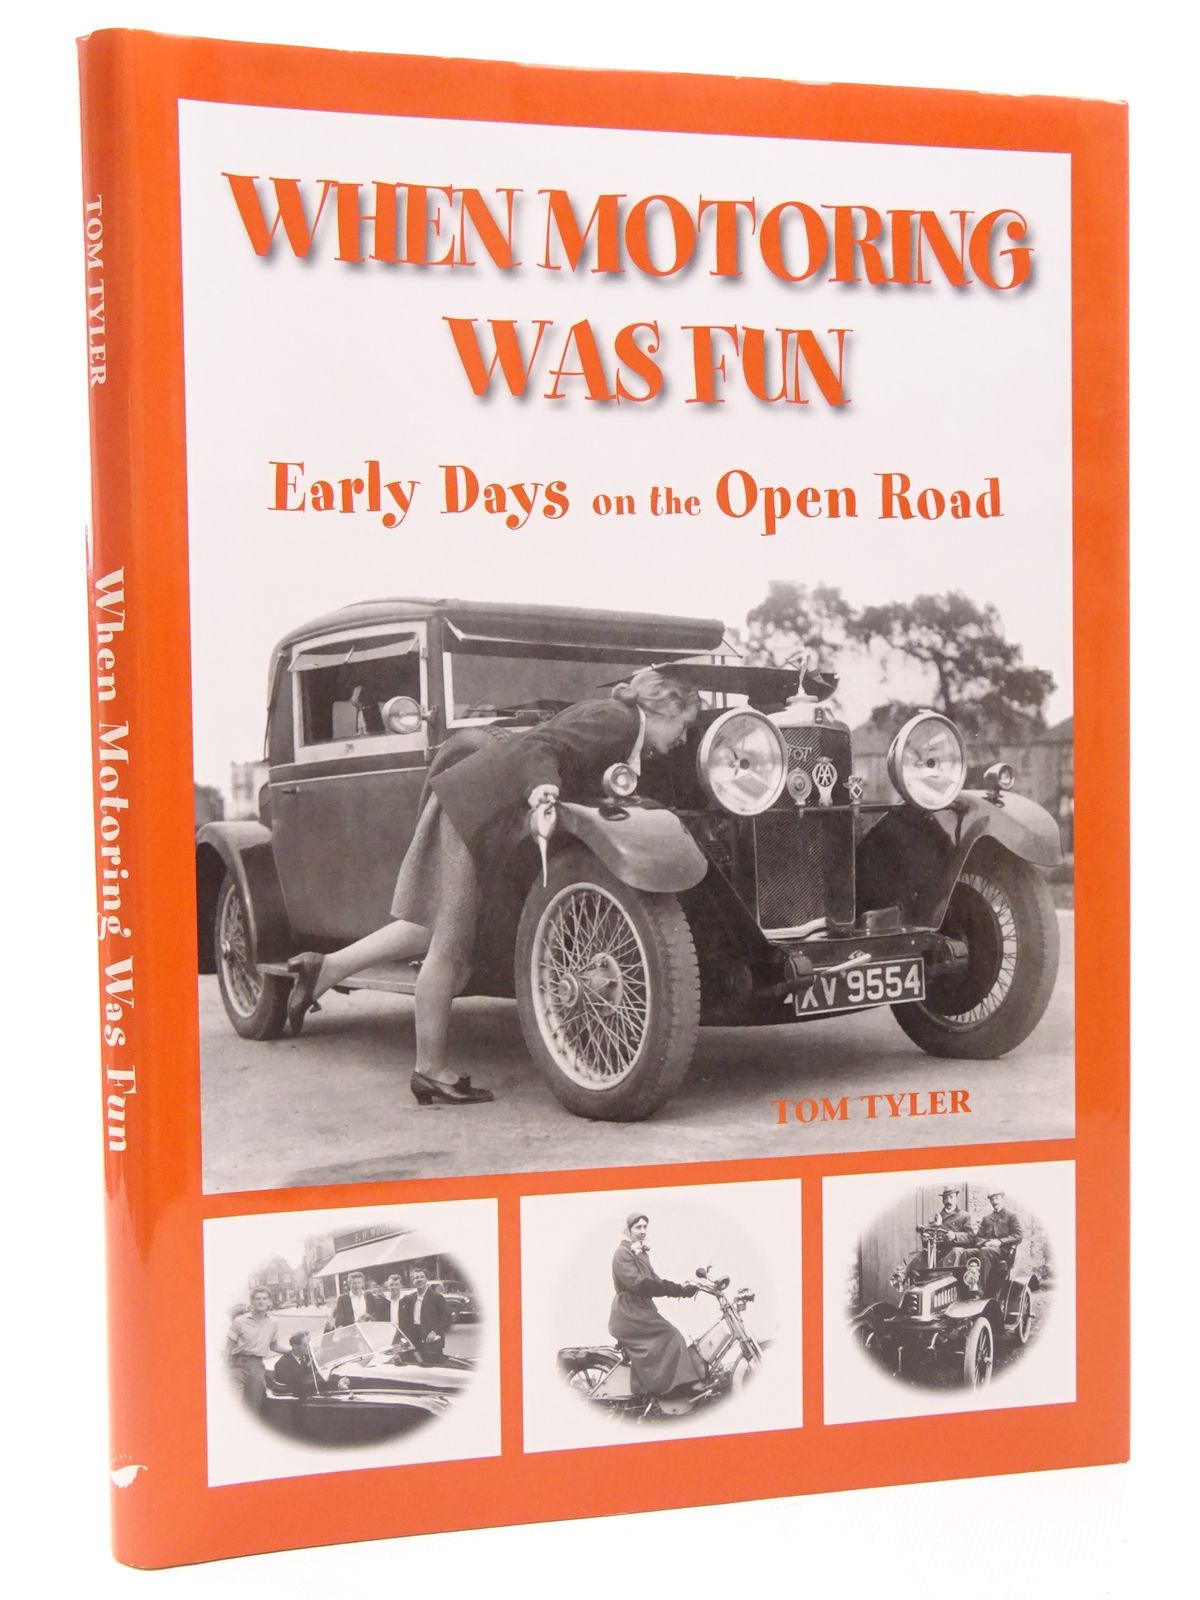 Photo of WHEN MOTORING WAS FUN EARLY DAYS ON THE OPEN ROAD written by Tyler, Tom published by Halsgrove (STOCK CODE: 1815735)  for sale by Stella & Rose's Books